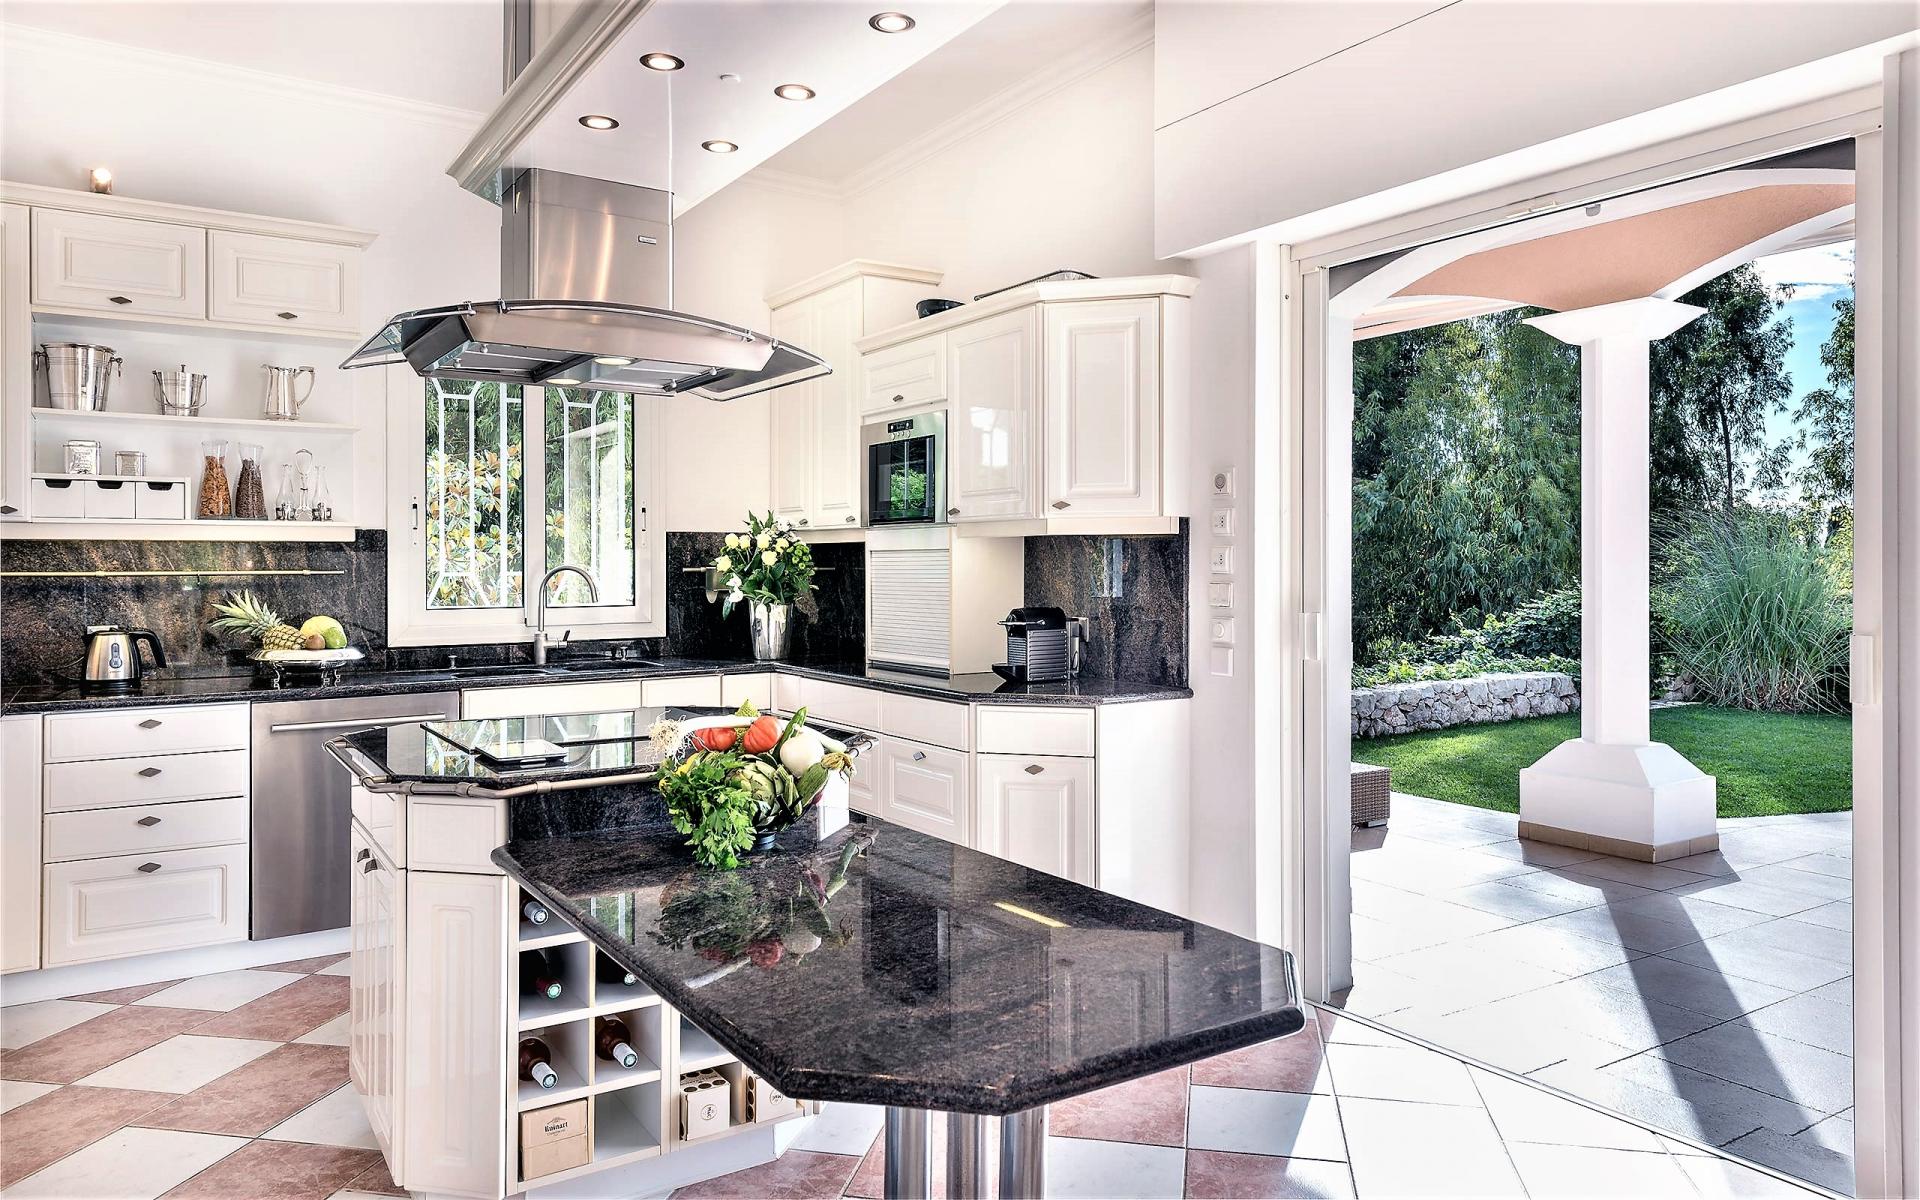 BEAUTIFUL KITCHEN WITH ALL APPLIANCES NEEDED